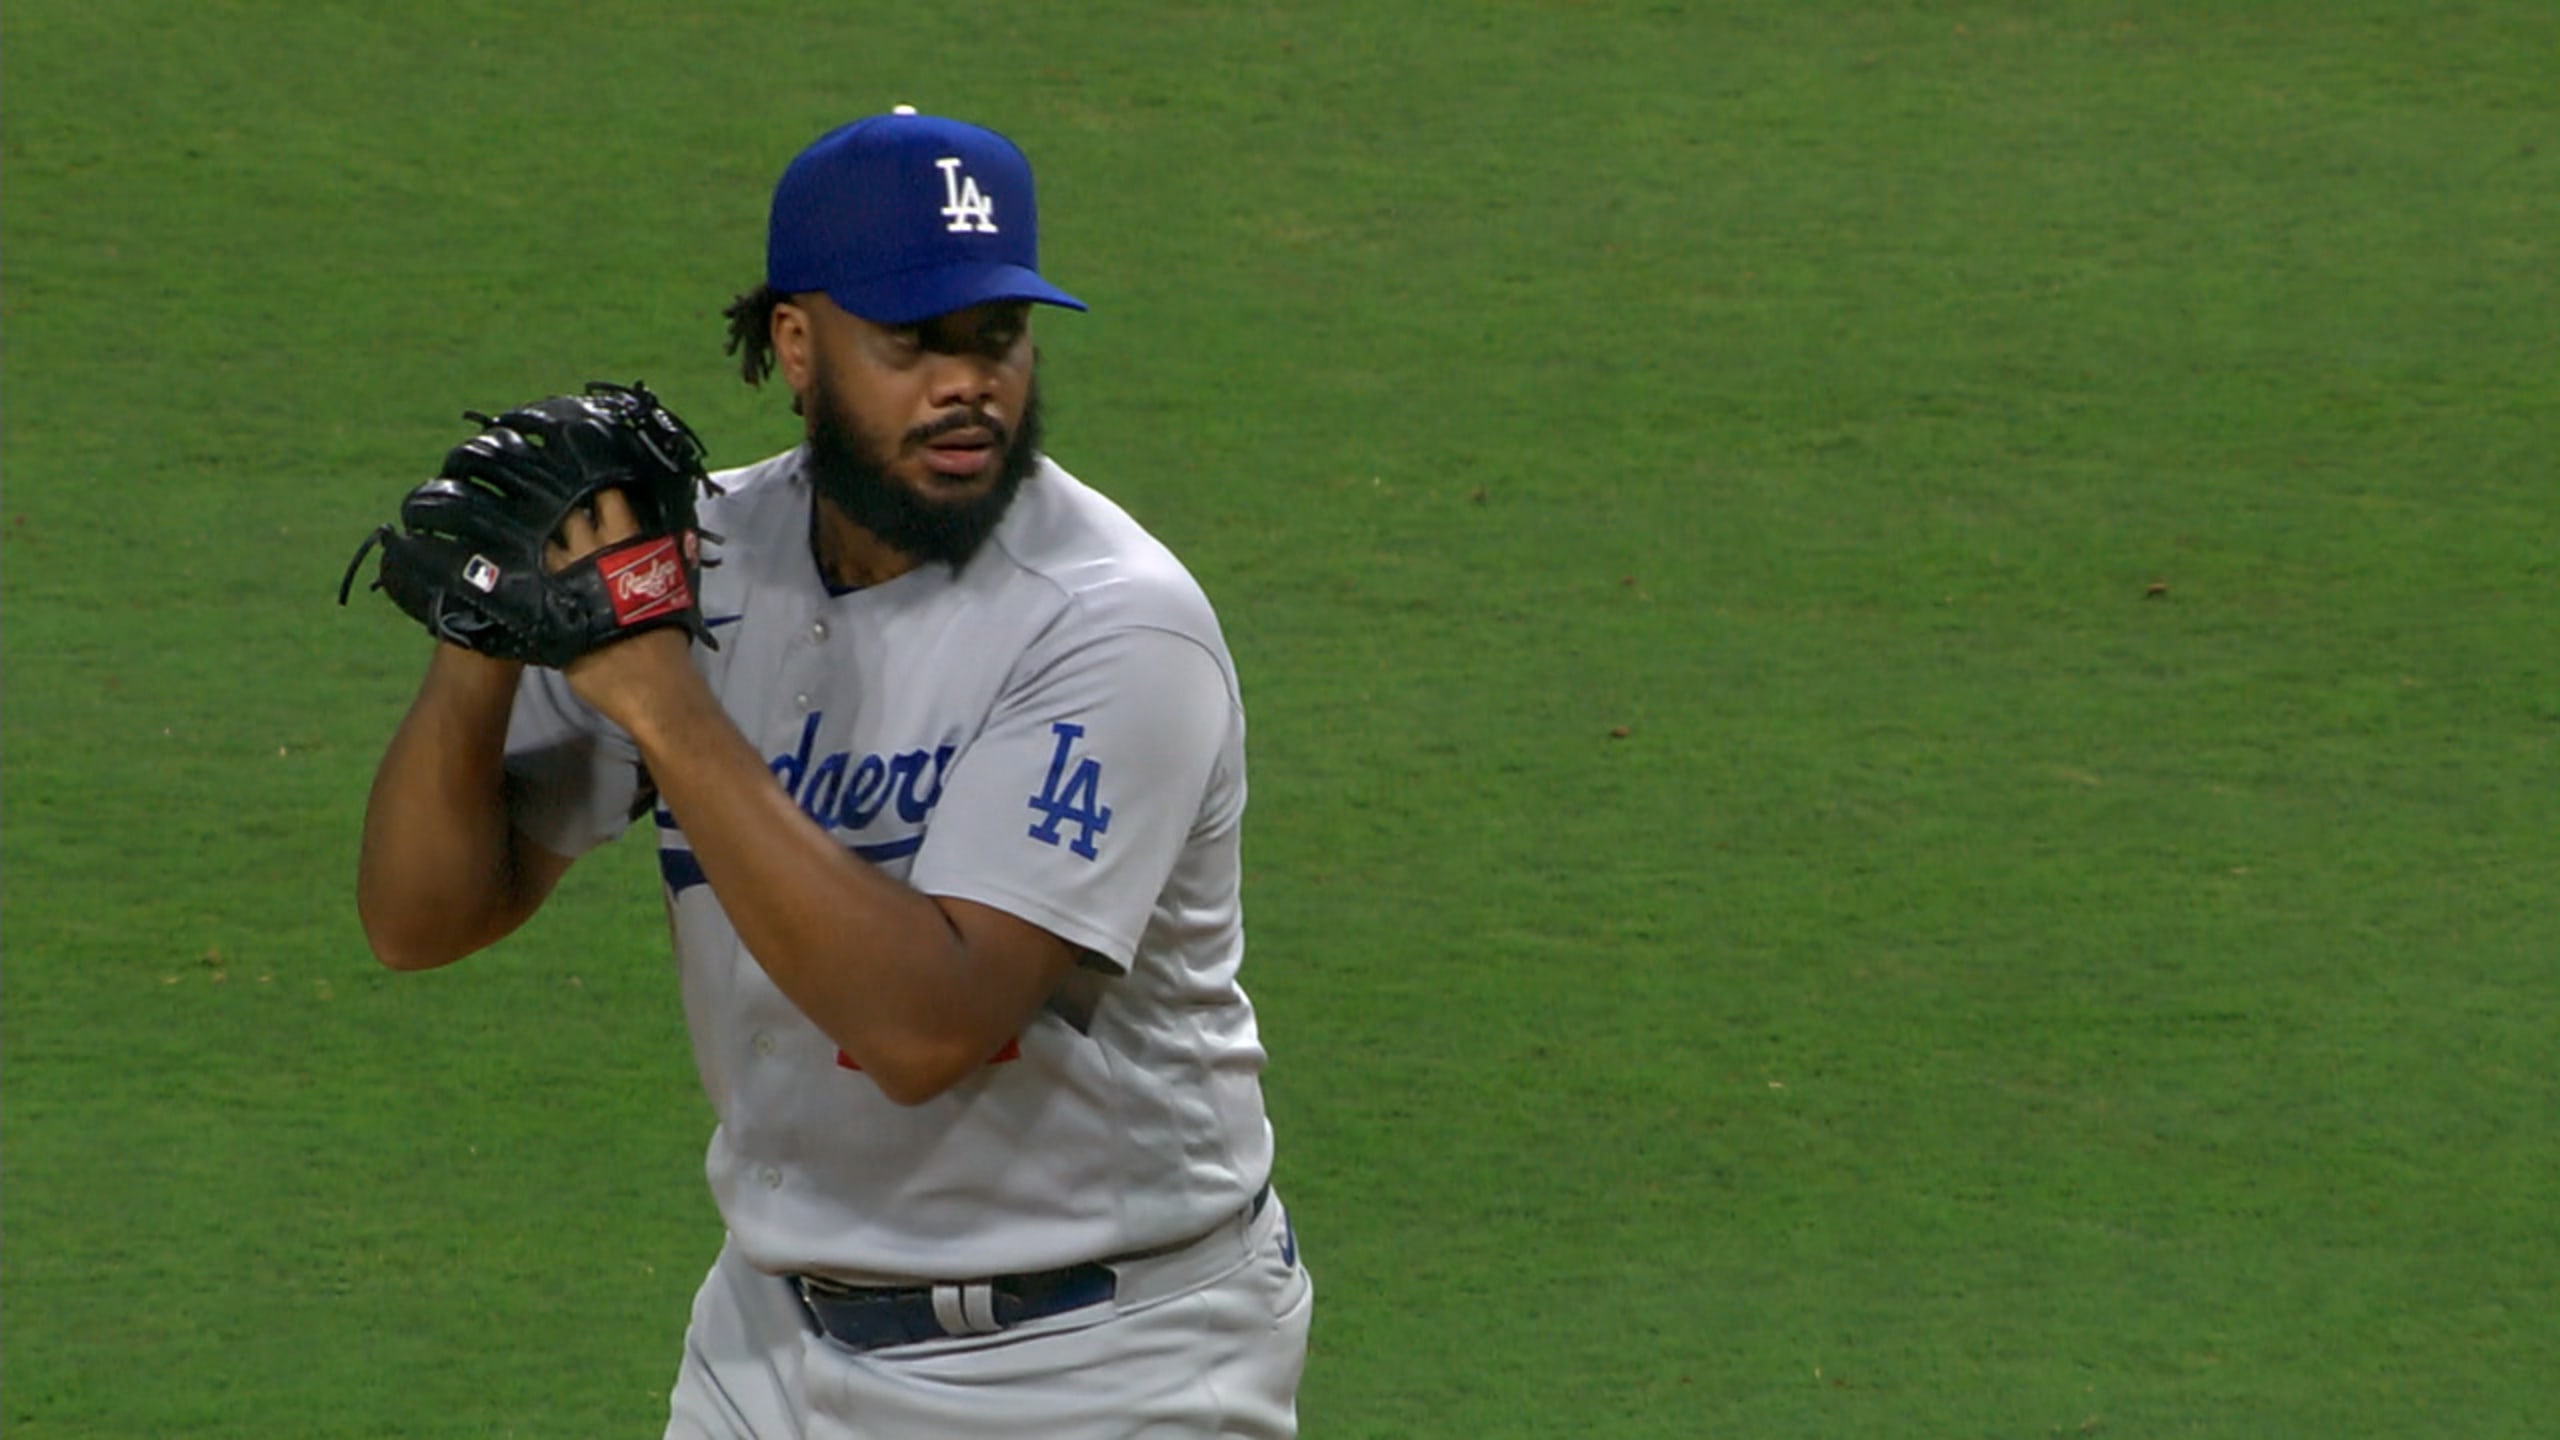 Kenley Jansen is the 12th MLB reliever with 1,000 career strikeouts